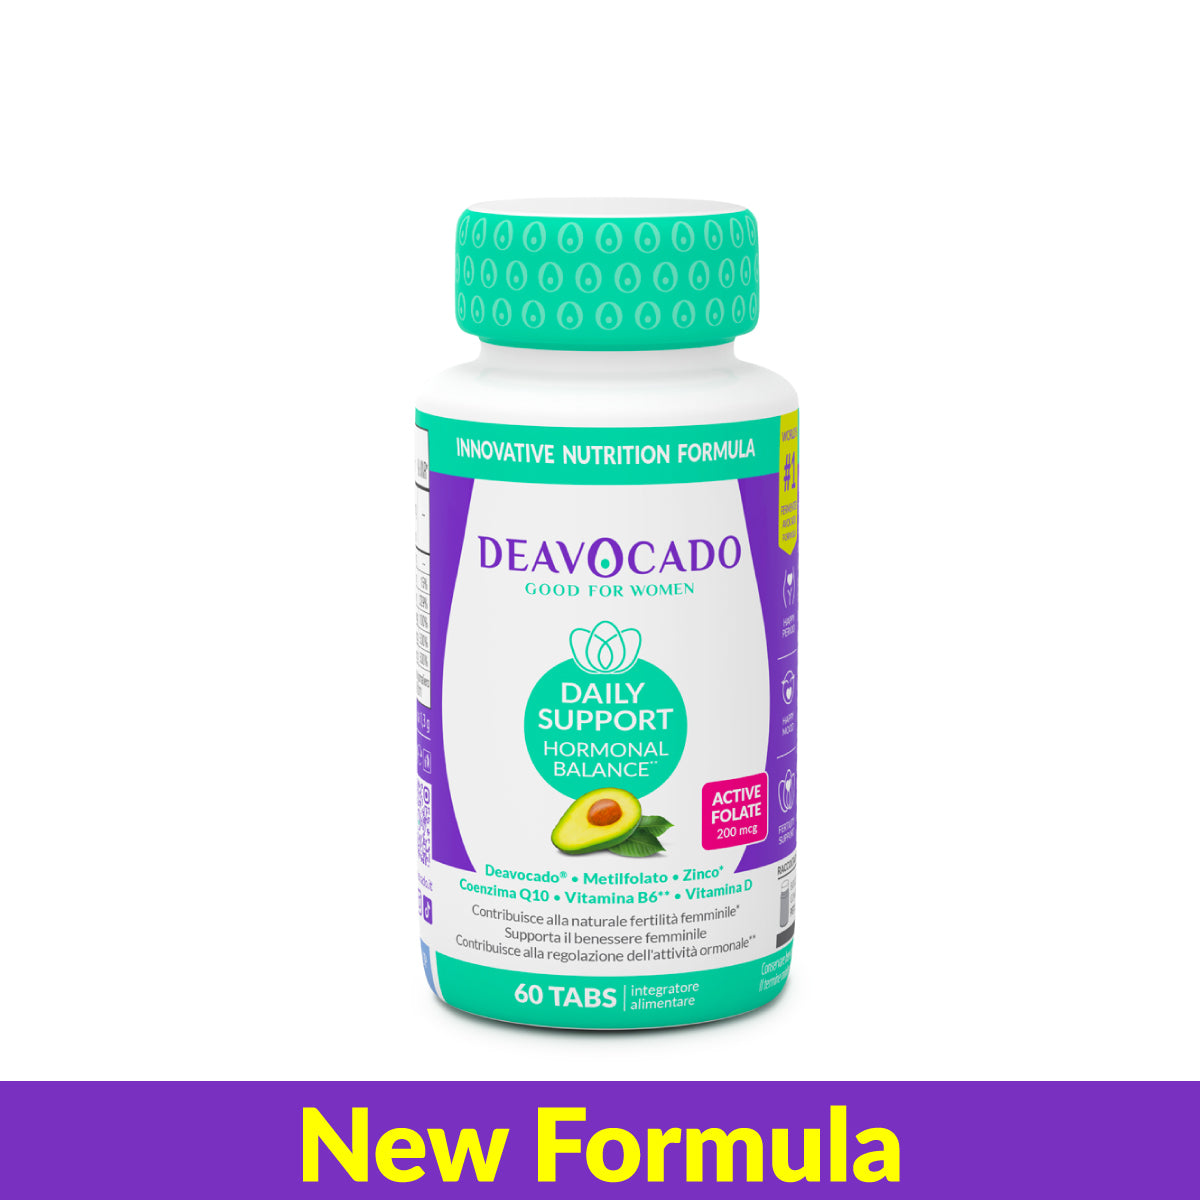 DAILY SUPPORT HORMONAL BALANCE